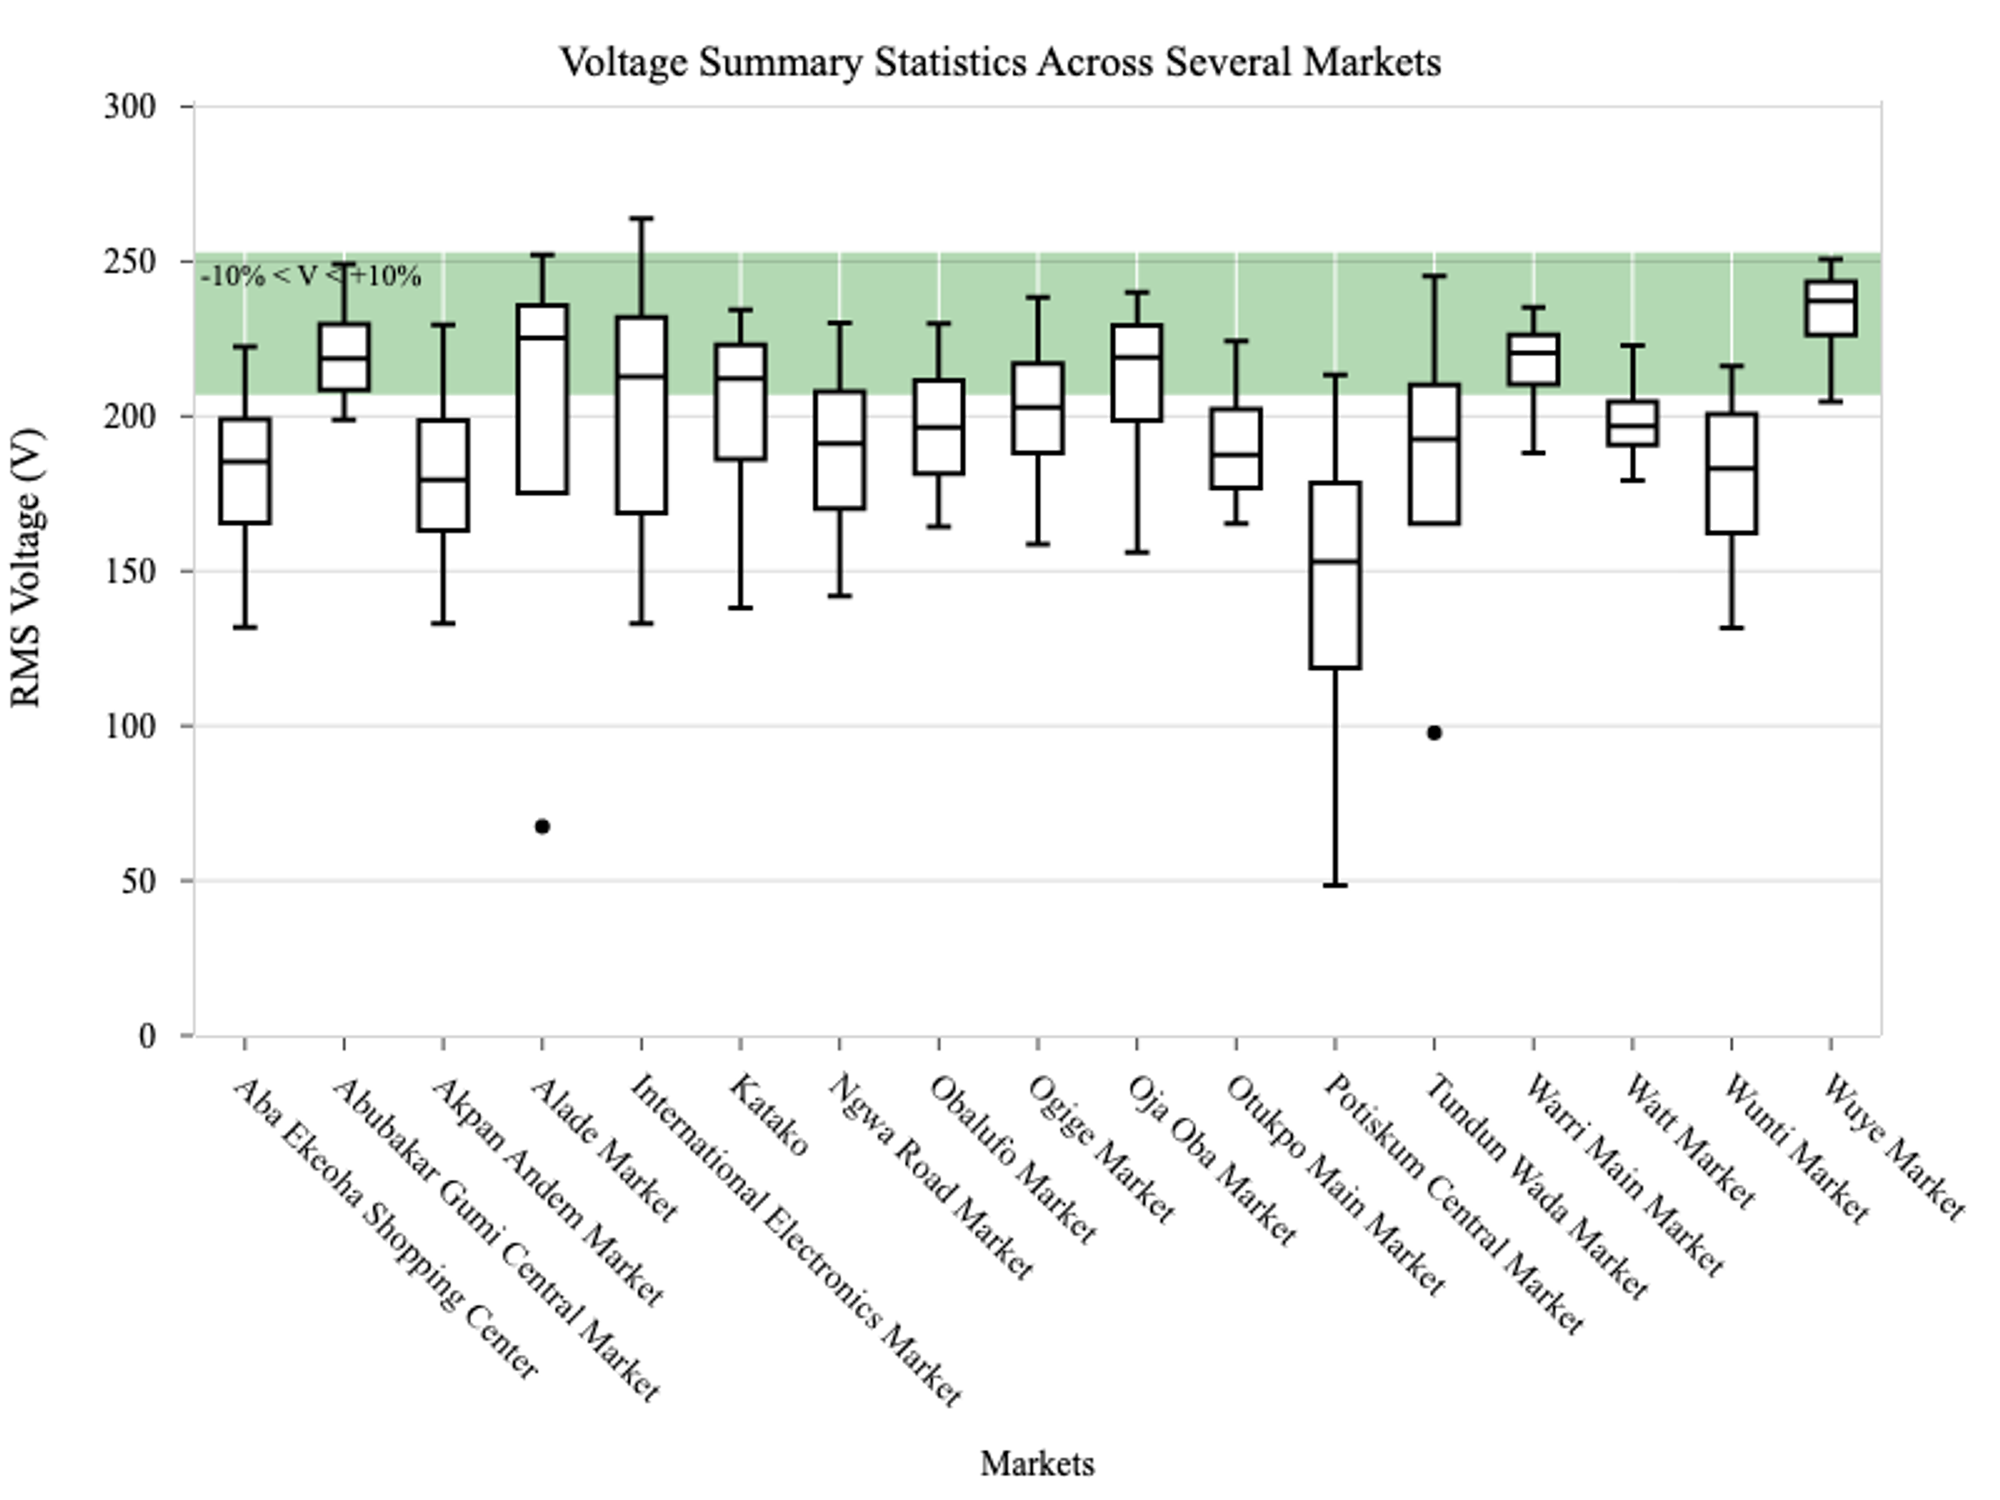 Figure 12: Voltage summary statistics across 17 markets, with “outage” voltages (below 23V), removed. The green region of the plot portrays the ±10% recommended voltage tolerance window. All 17 markets have different voltage characteristics, most of which seem to consistently experience low voltage.